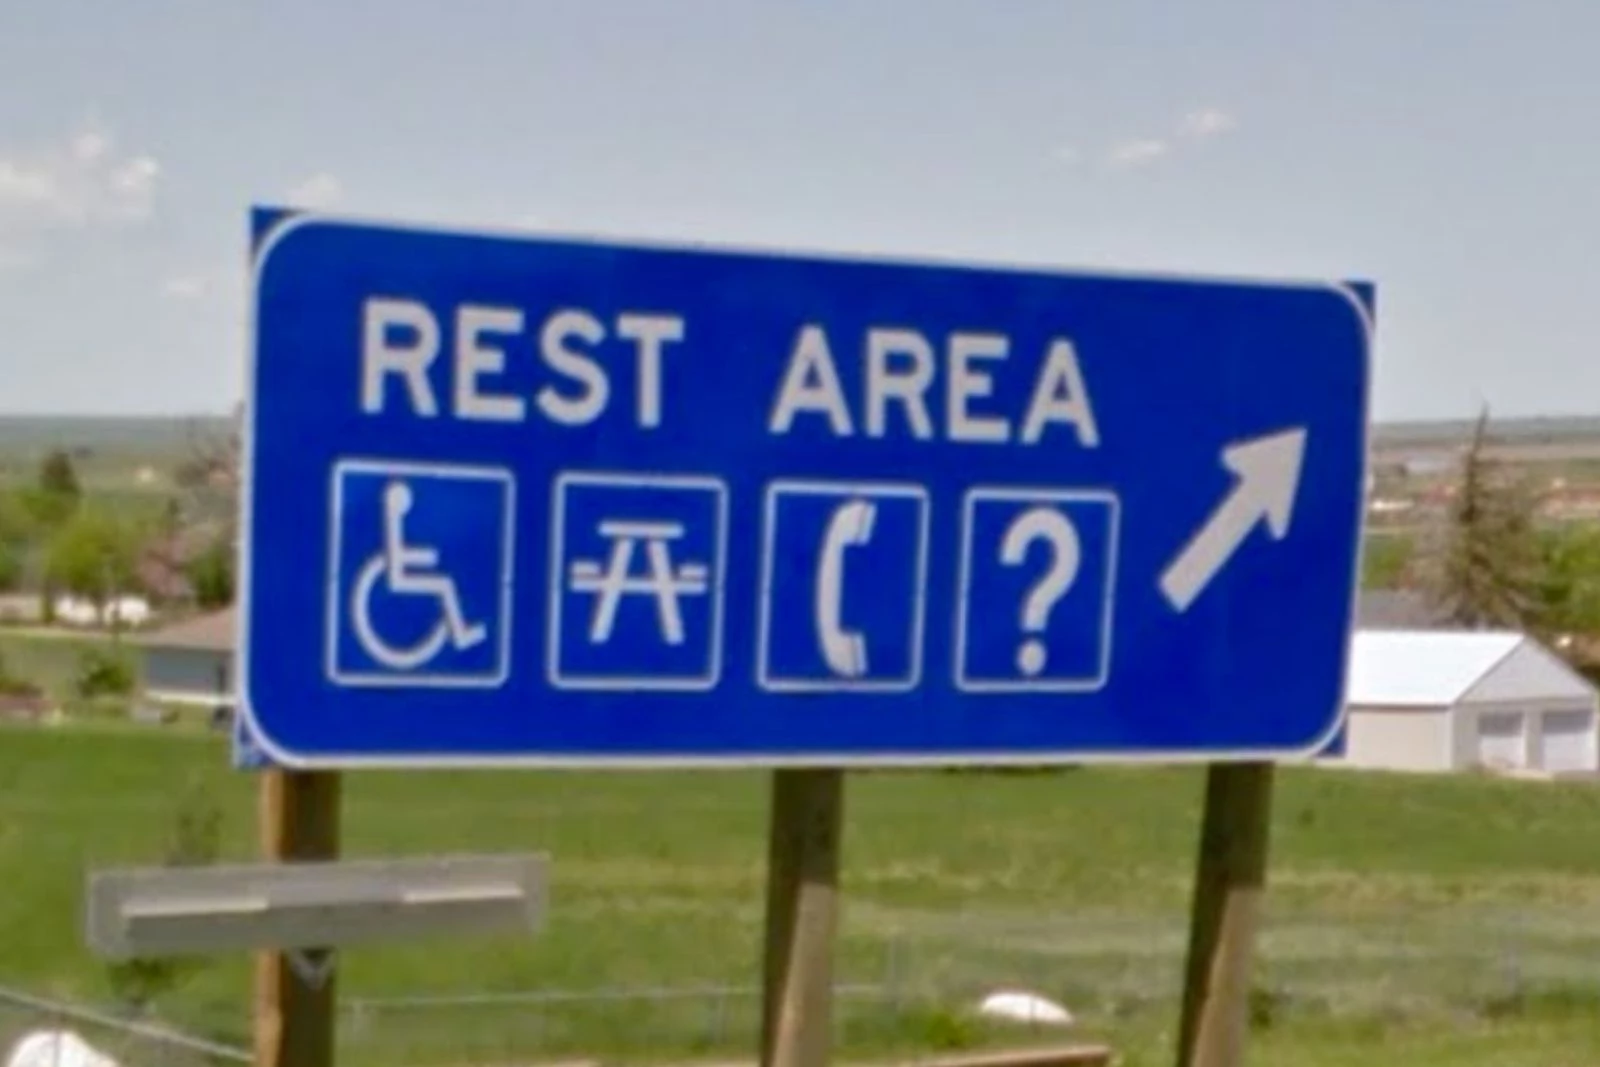 nearest rest stop to me now